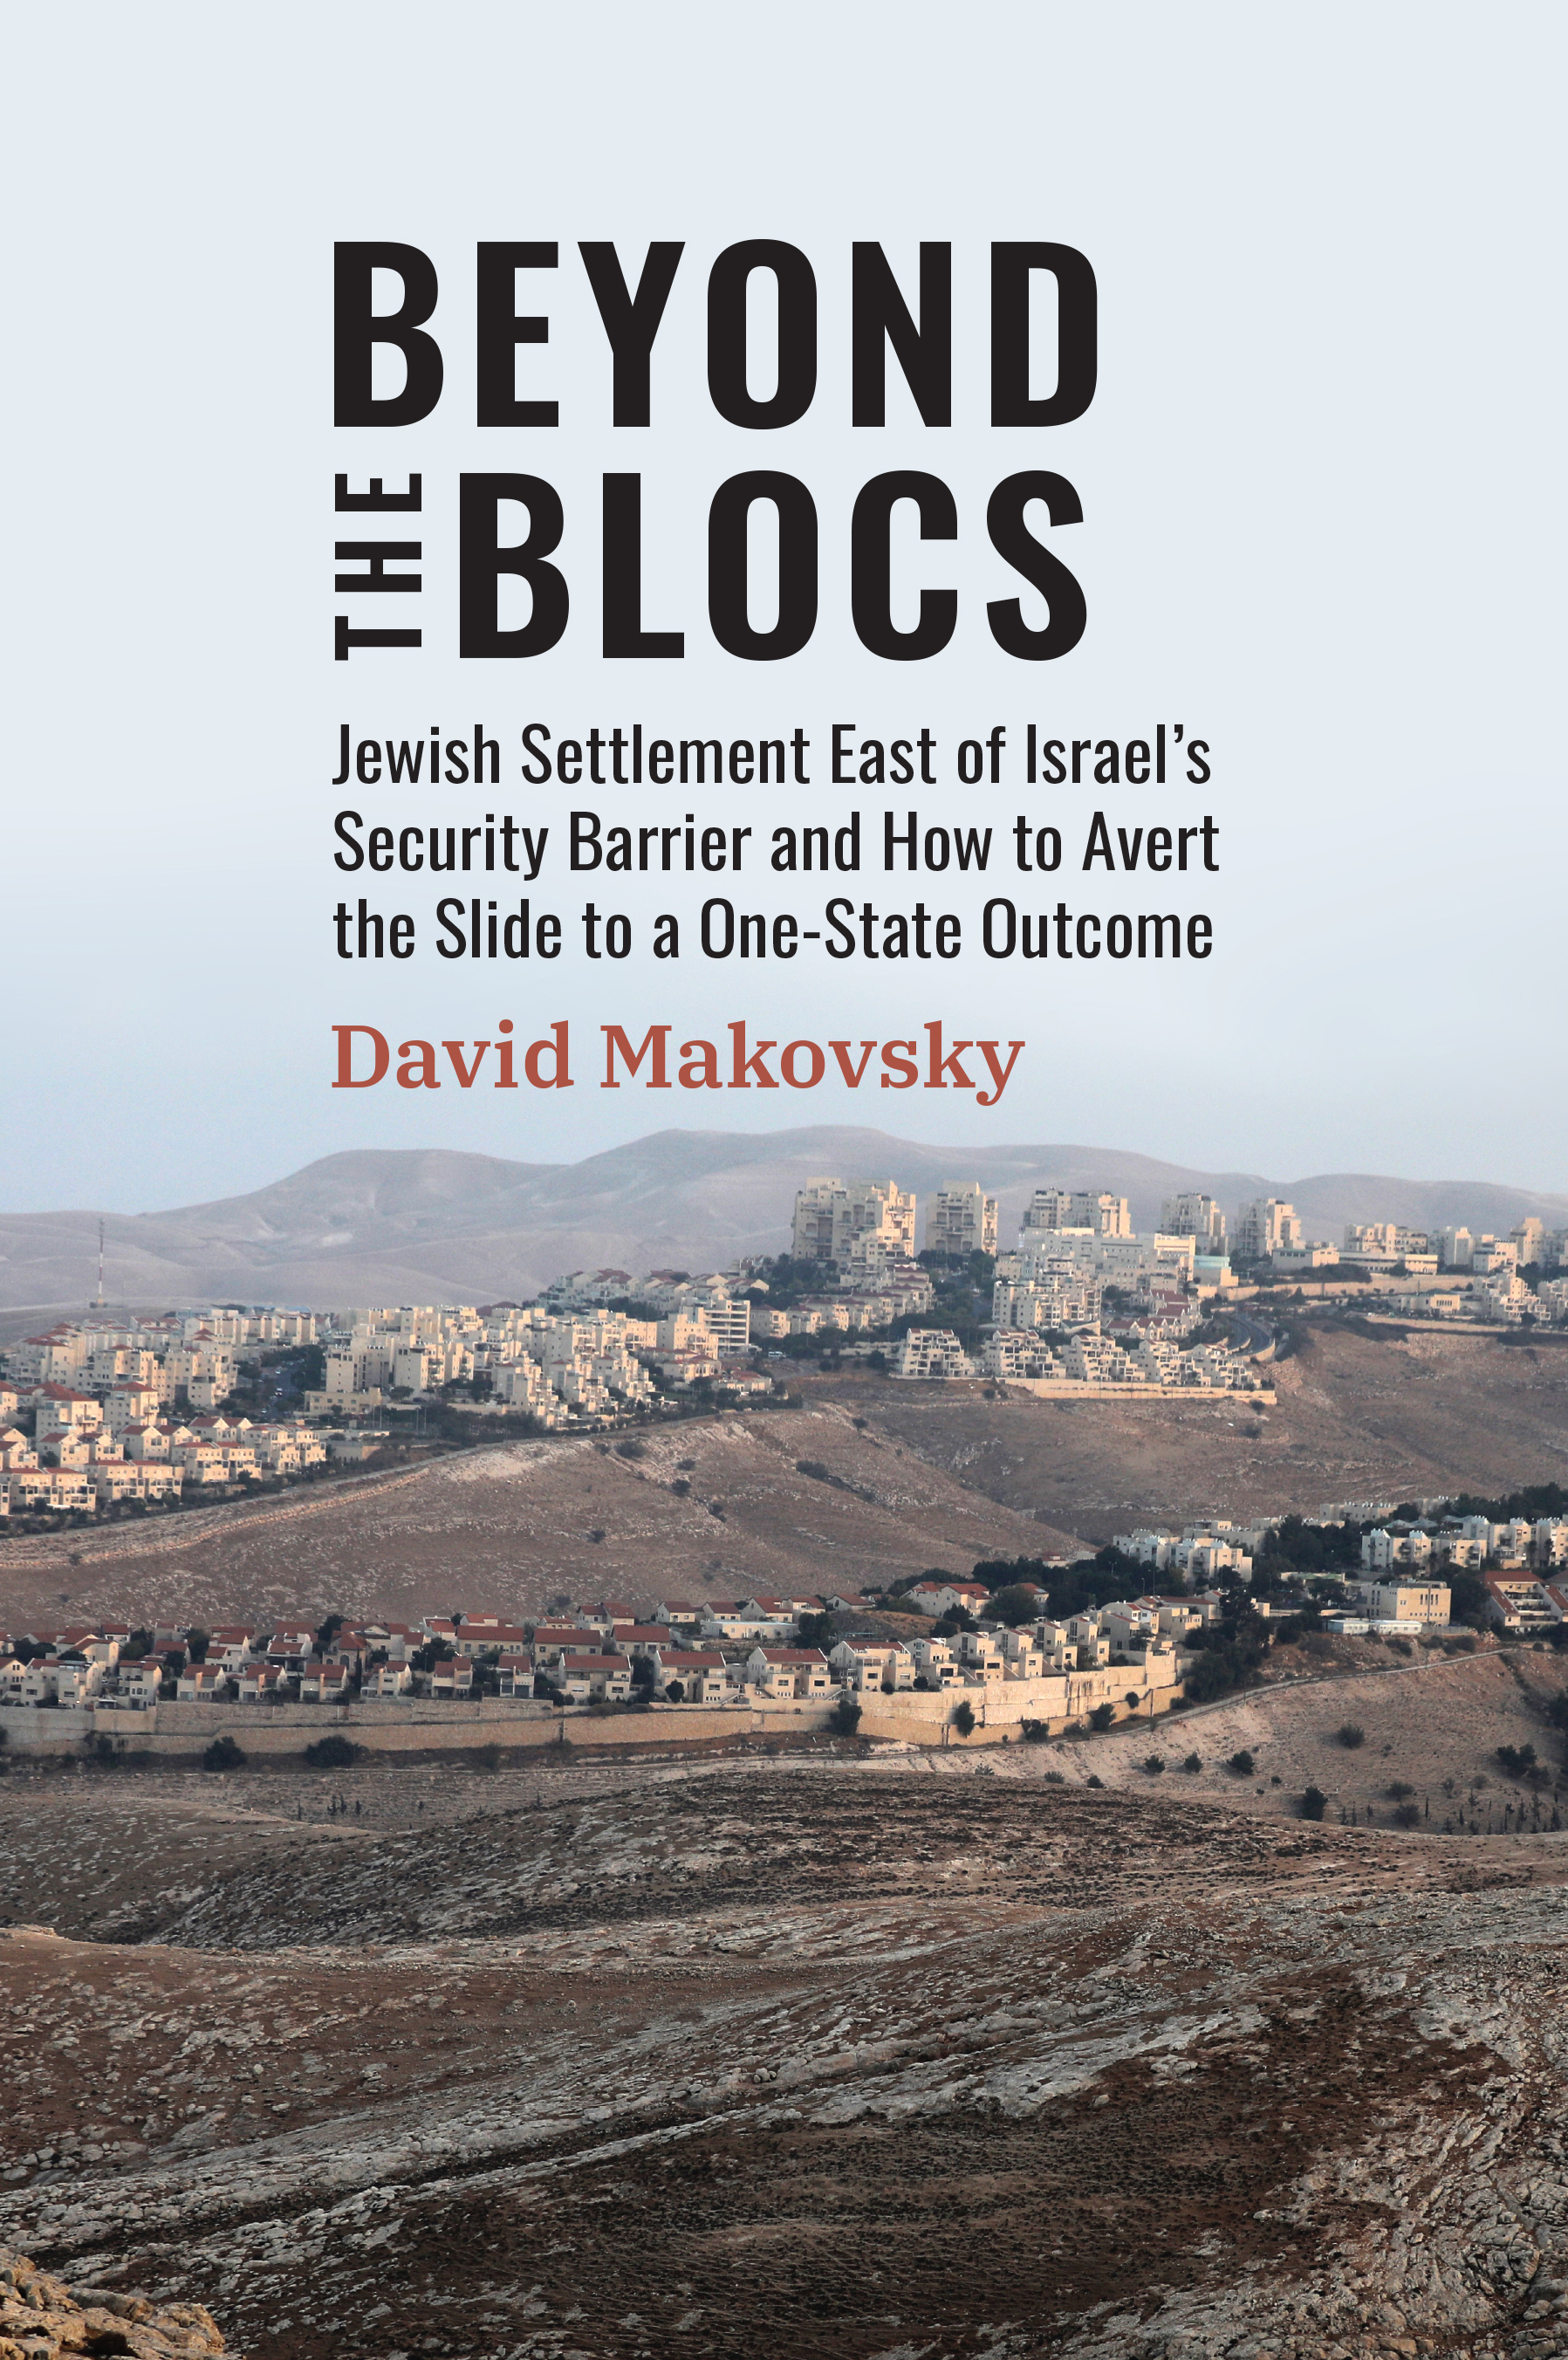 Beyond the Blocs: Jewish Settlement East of Israel's Security Barrier and How to Avert the Slide to a One-State Outcome